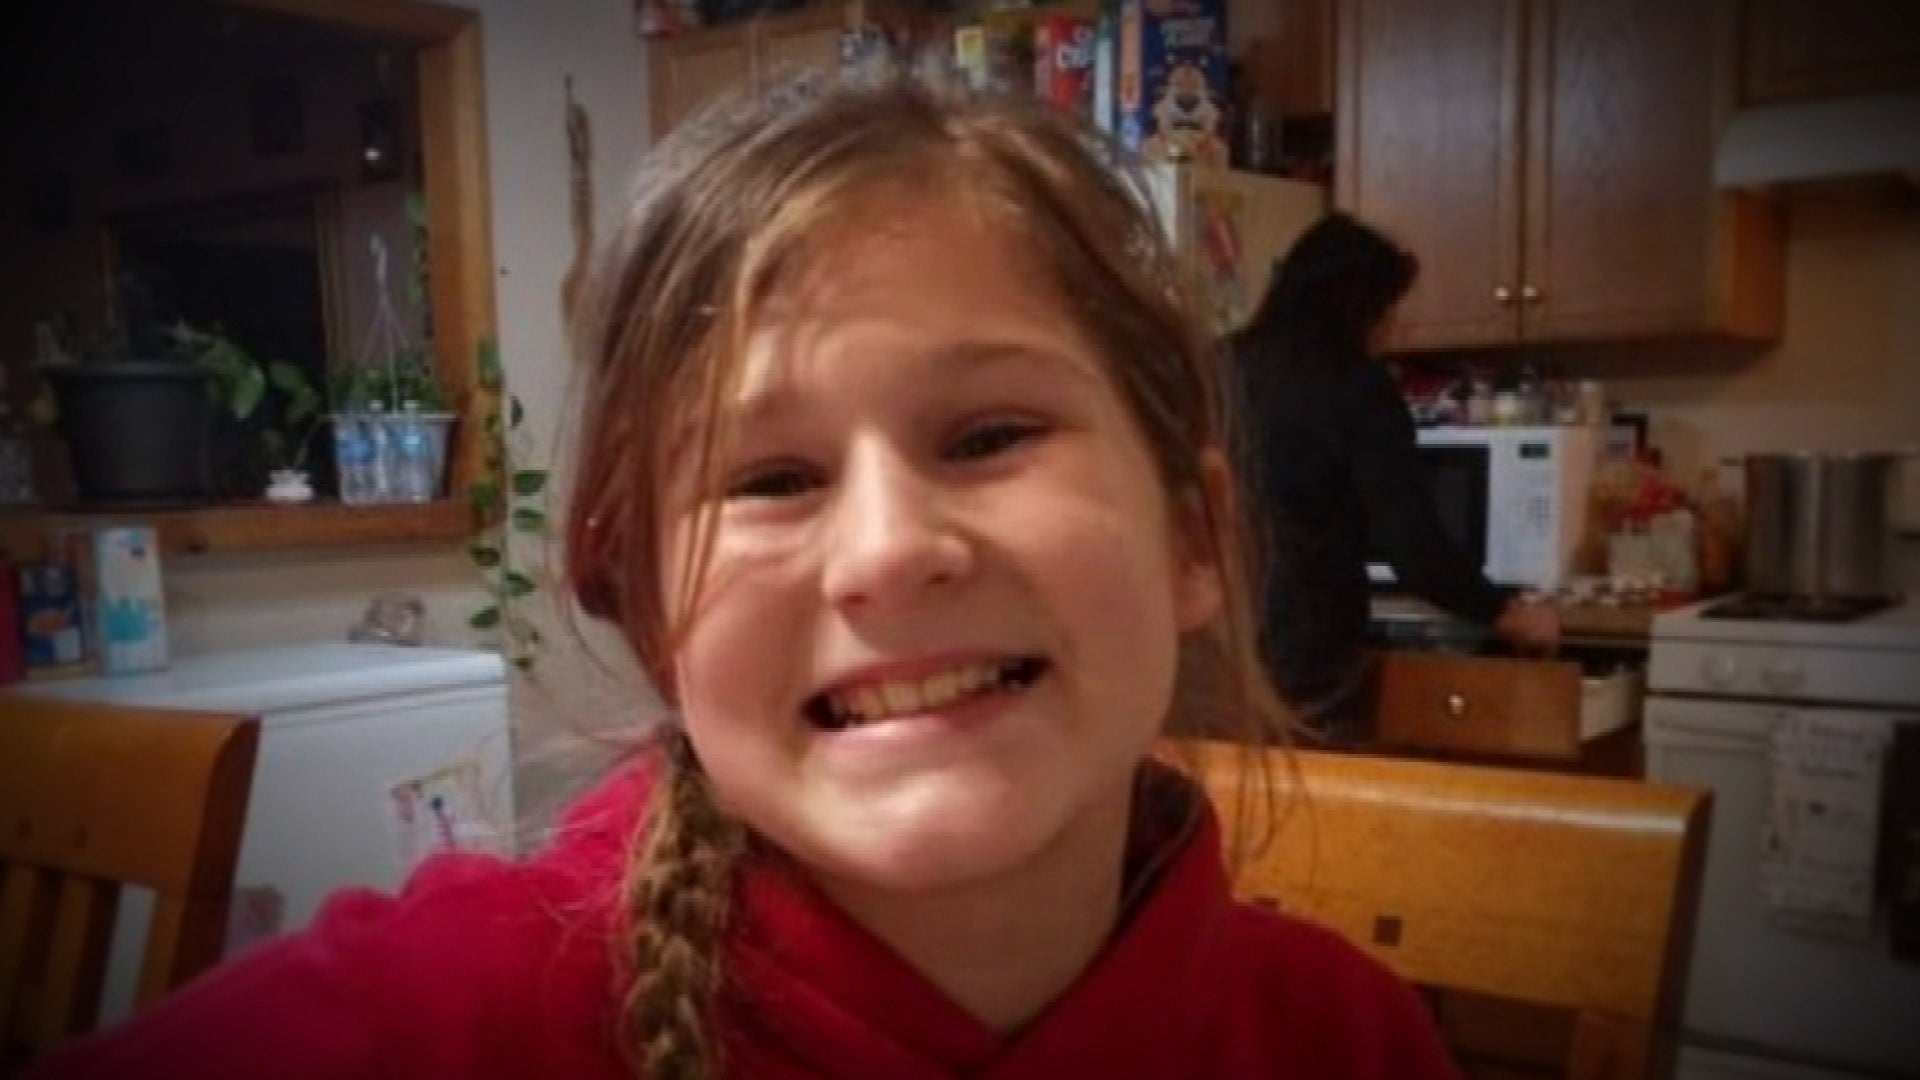 Parents Want Change After Bullied Daughter Dies by Suicide